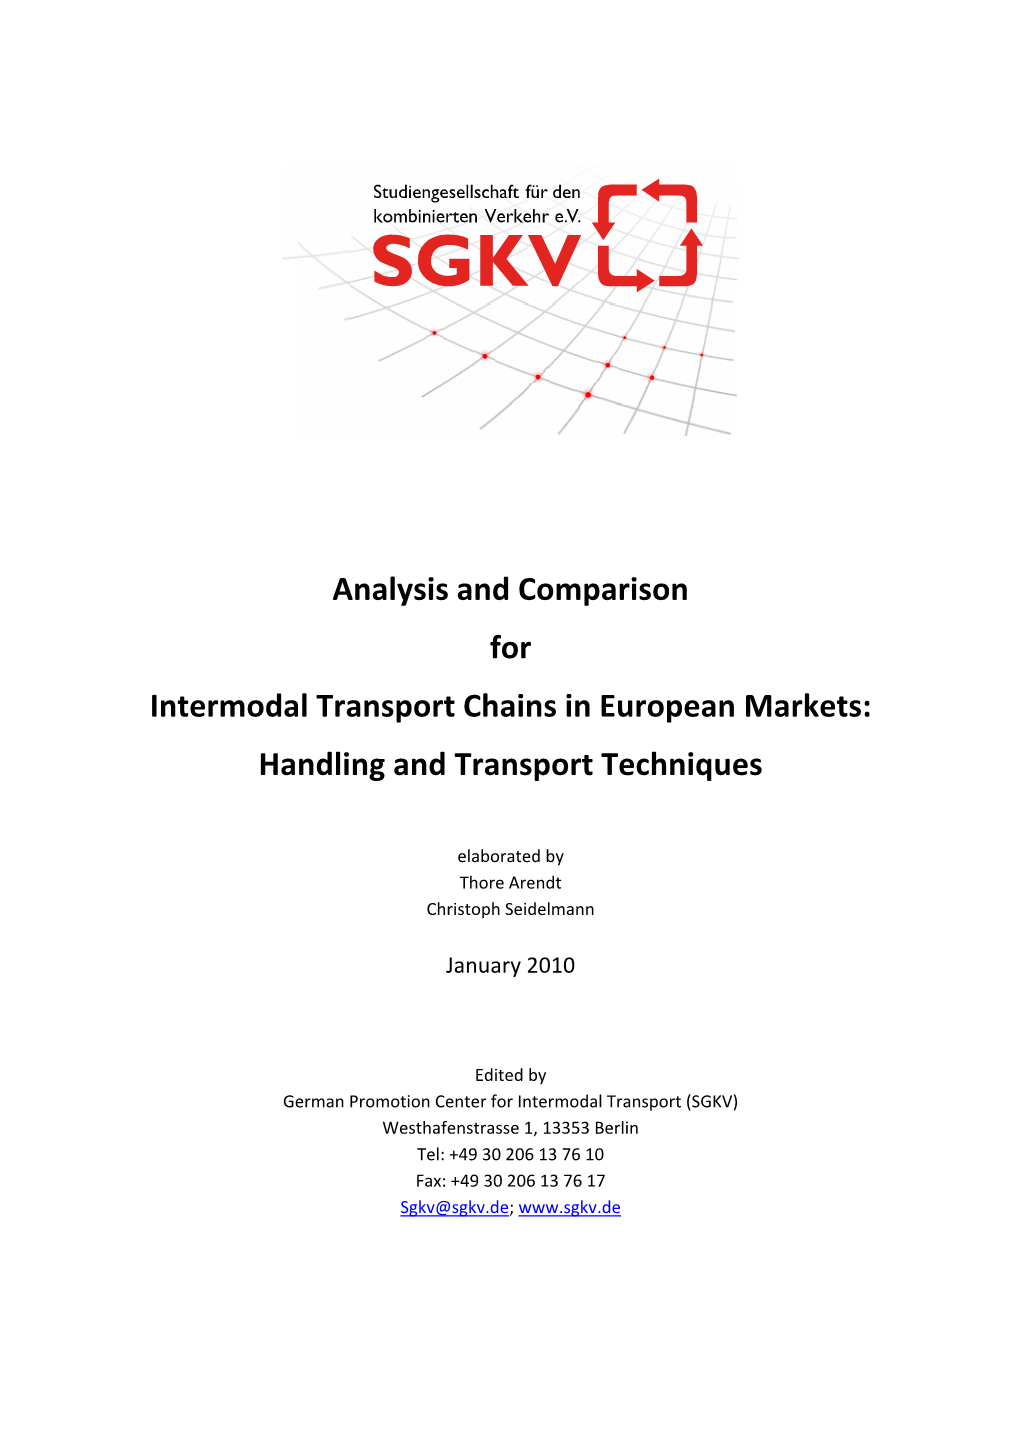 Analysis and Comparison for Intermodal Transport Chains in European Markets